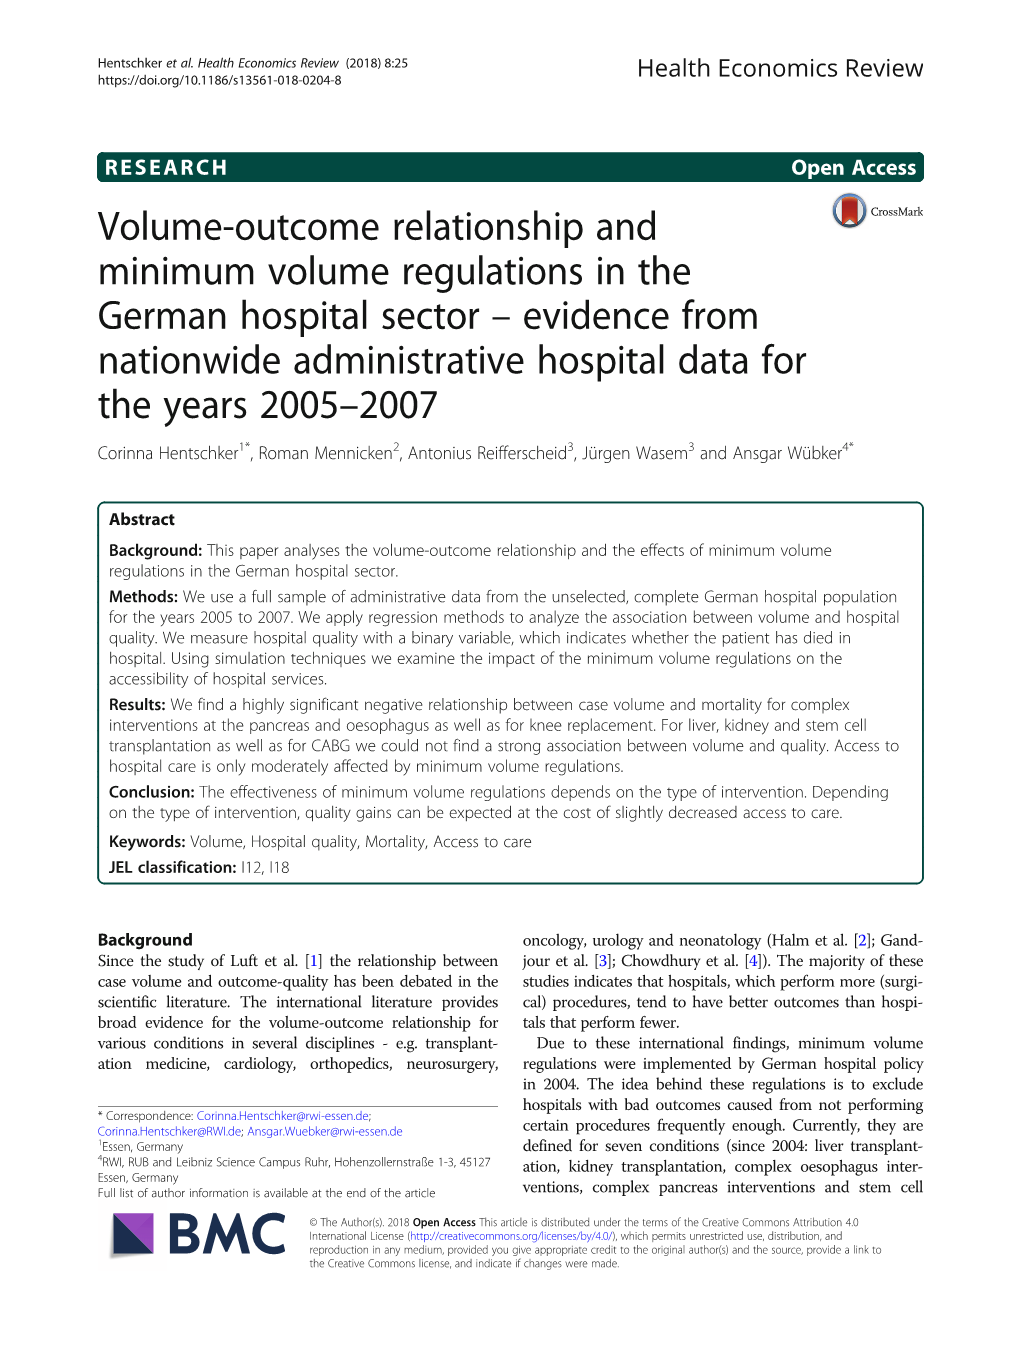 Volume-Outcome Relationship and Minimum Volume Regulations in The